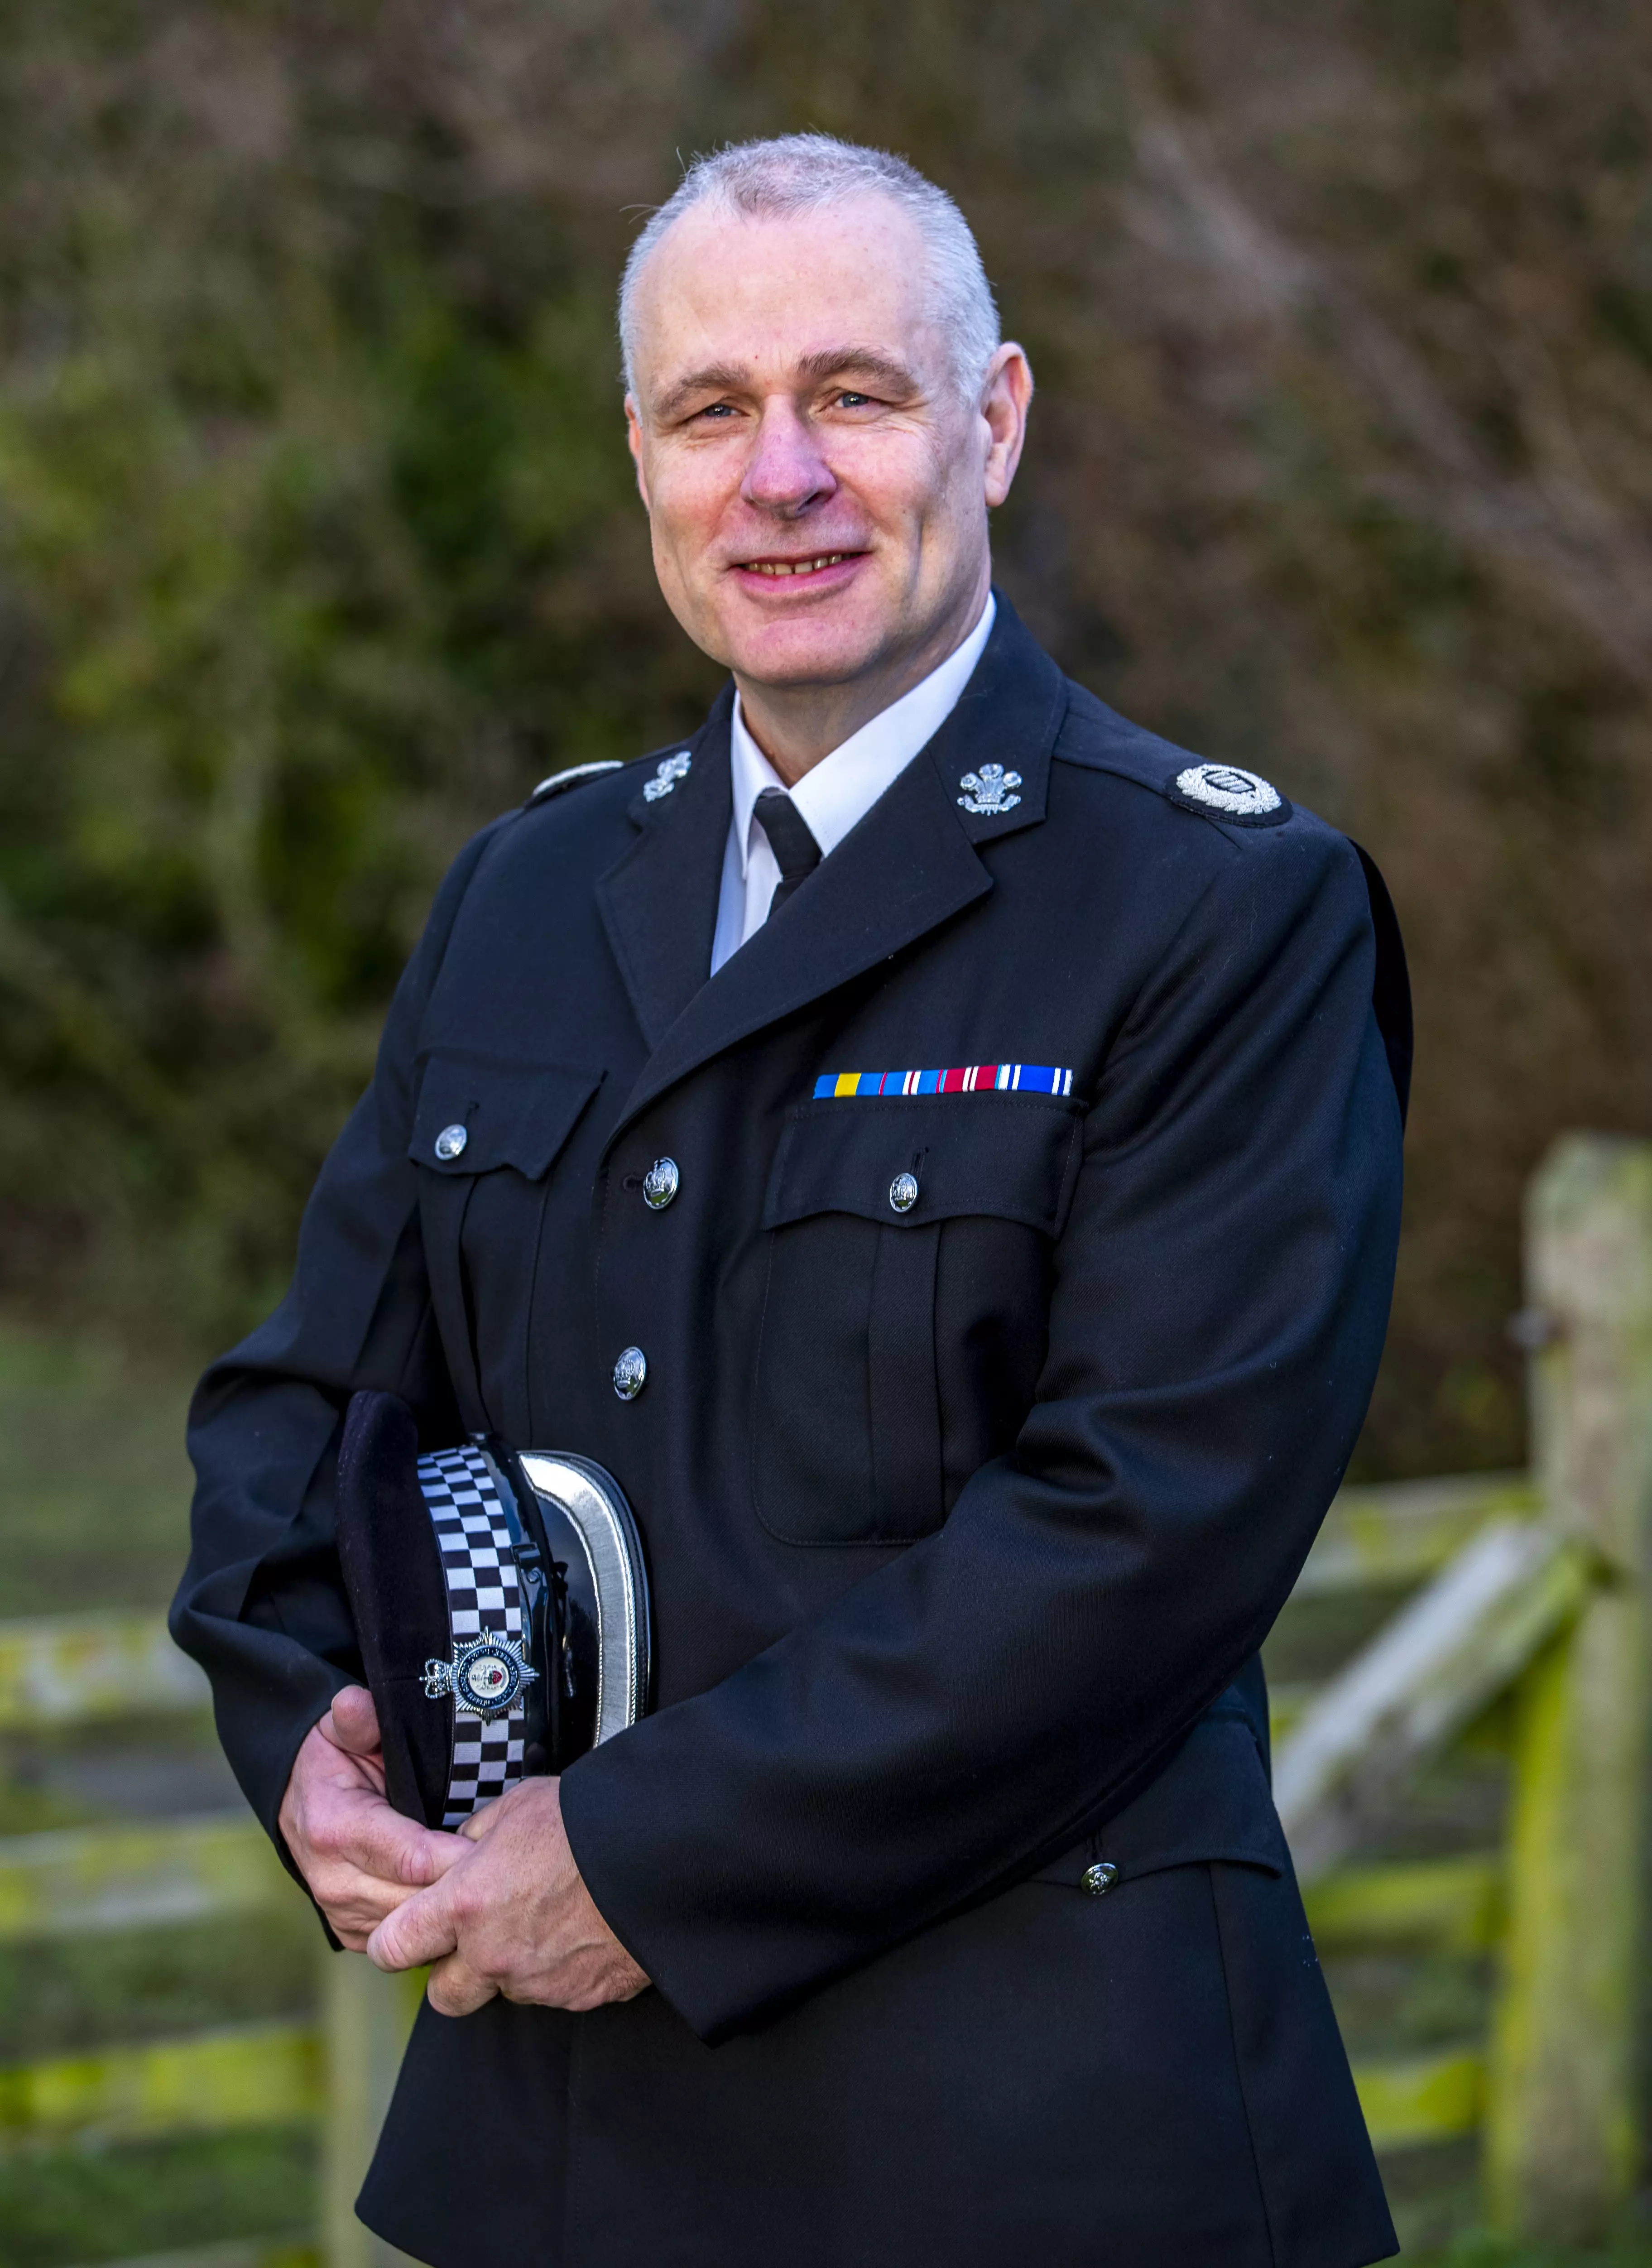 Retired police officer Mark Owen has also accepted an MBE (